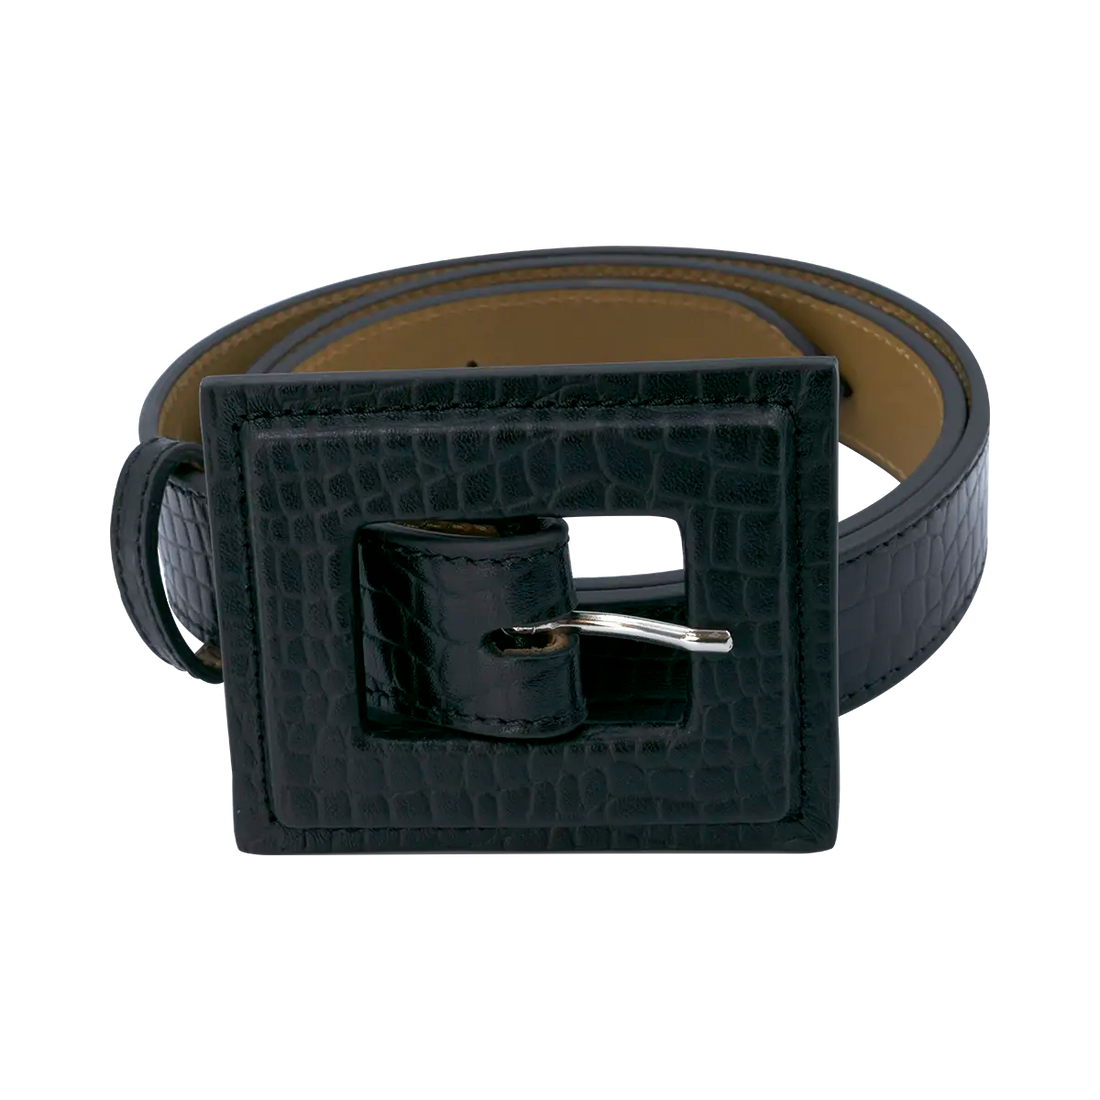 black  leather print belt with a large square buckle. Accessory for women in San Diego, CA.